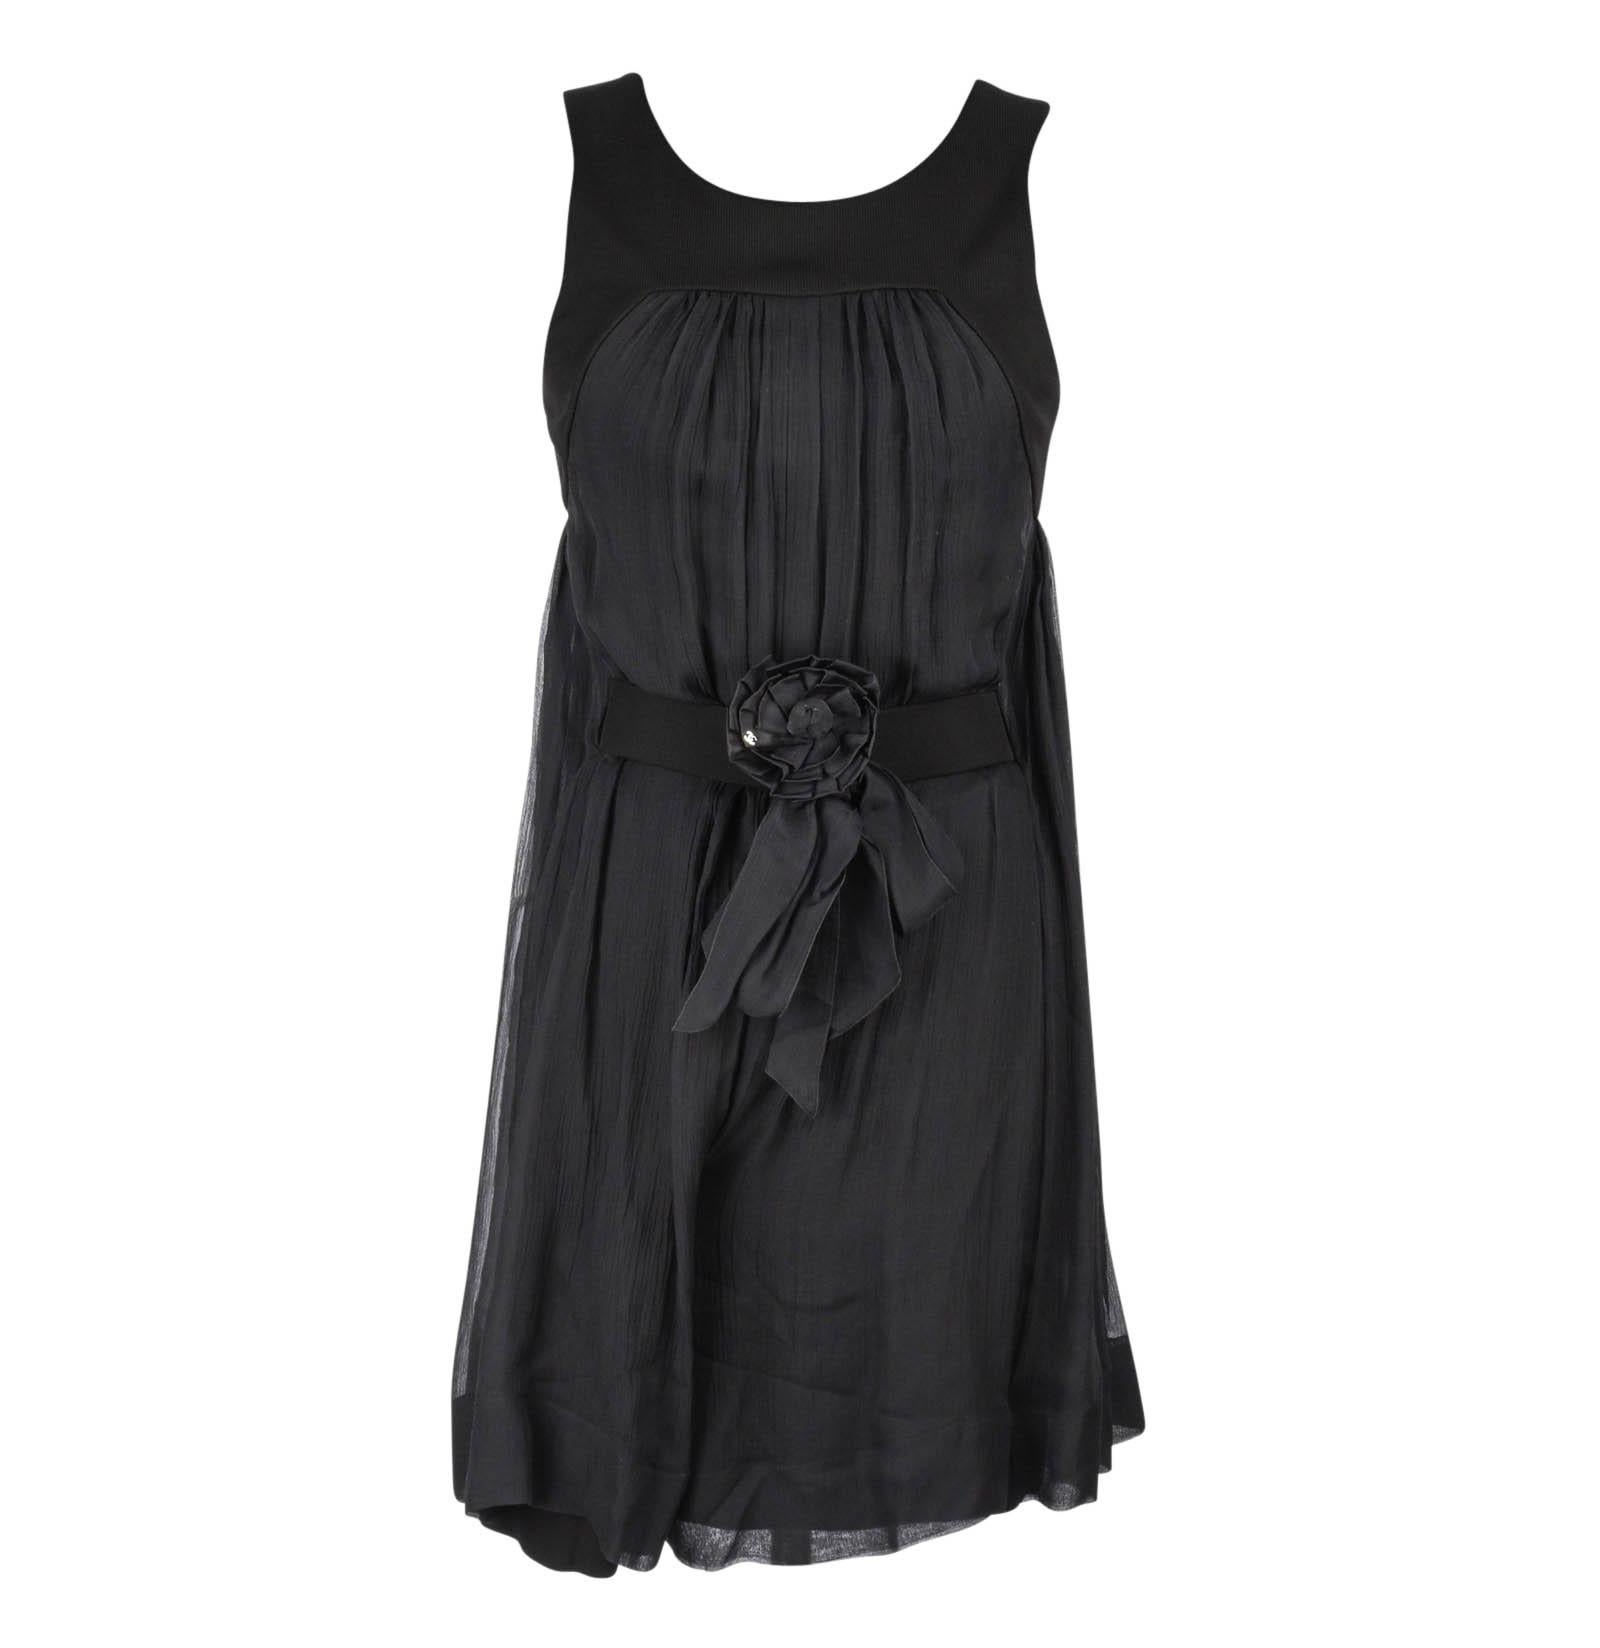 Guaranteed authentic Chanel 13P black dinner / cocktail culotte dress.
Dress is sleeveless and gently gathered at neck and rear.
The attached belt has a signature camellia in black with small silver CC.
Rear neckline is squared off with 2 CC